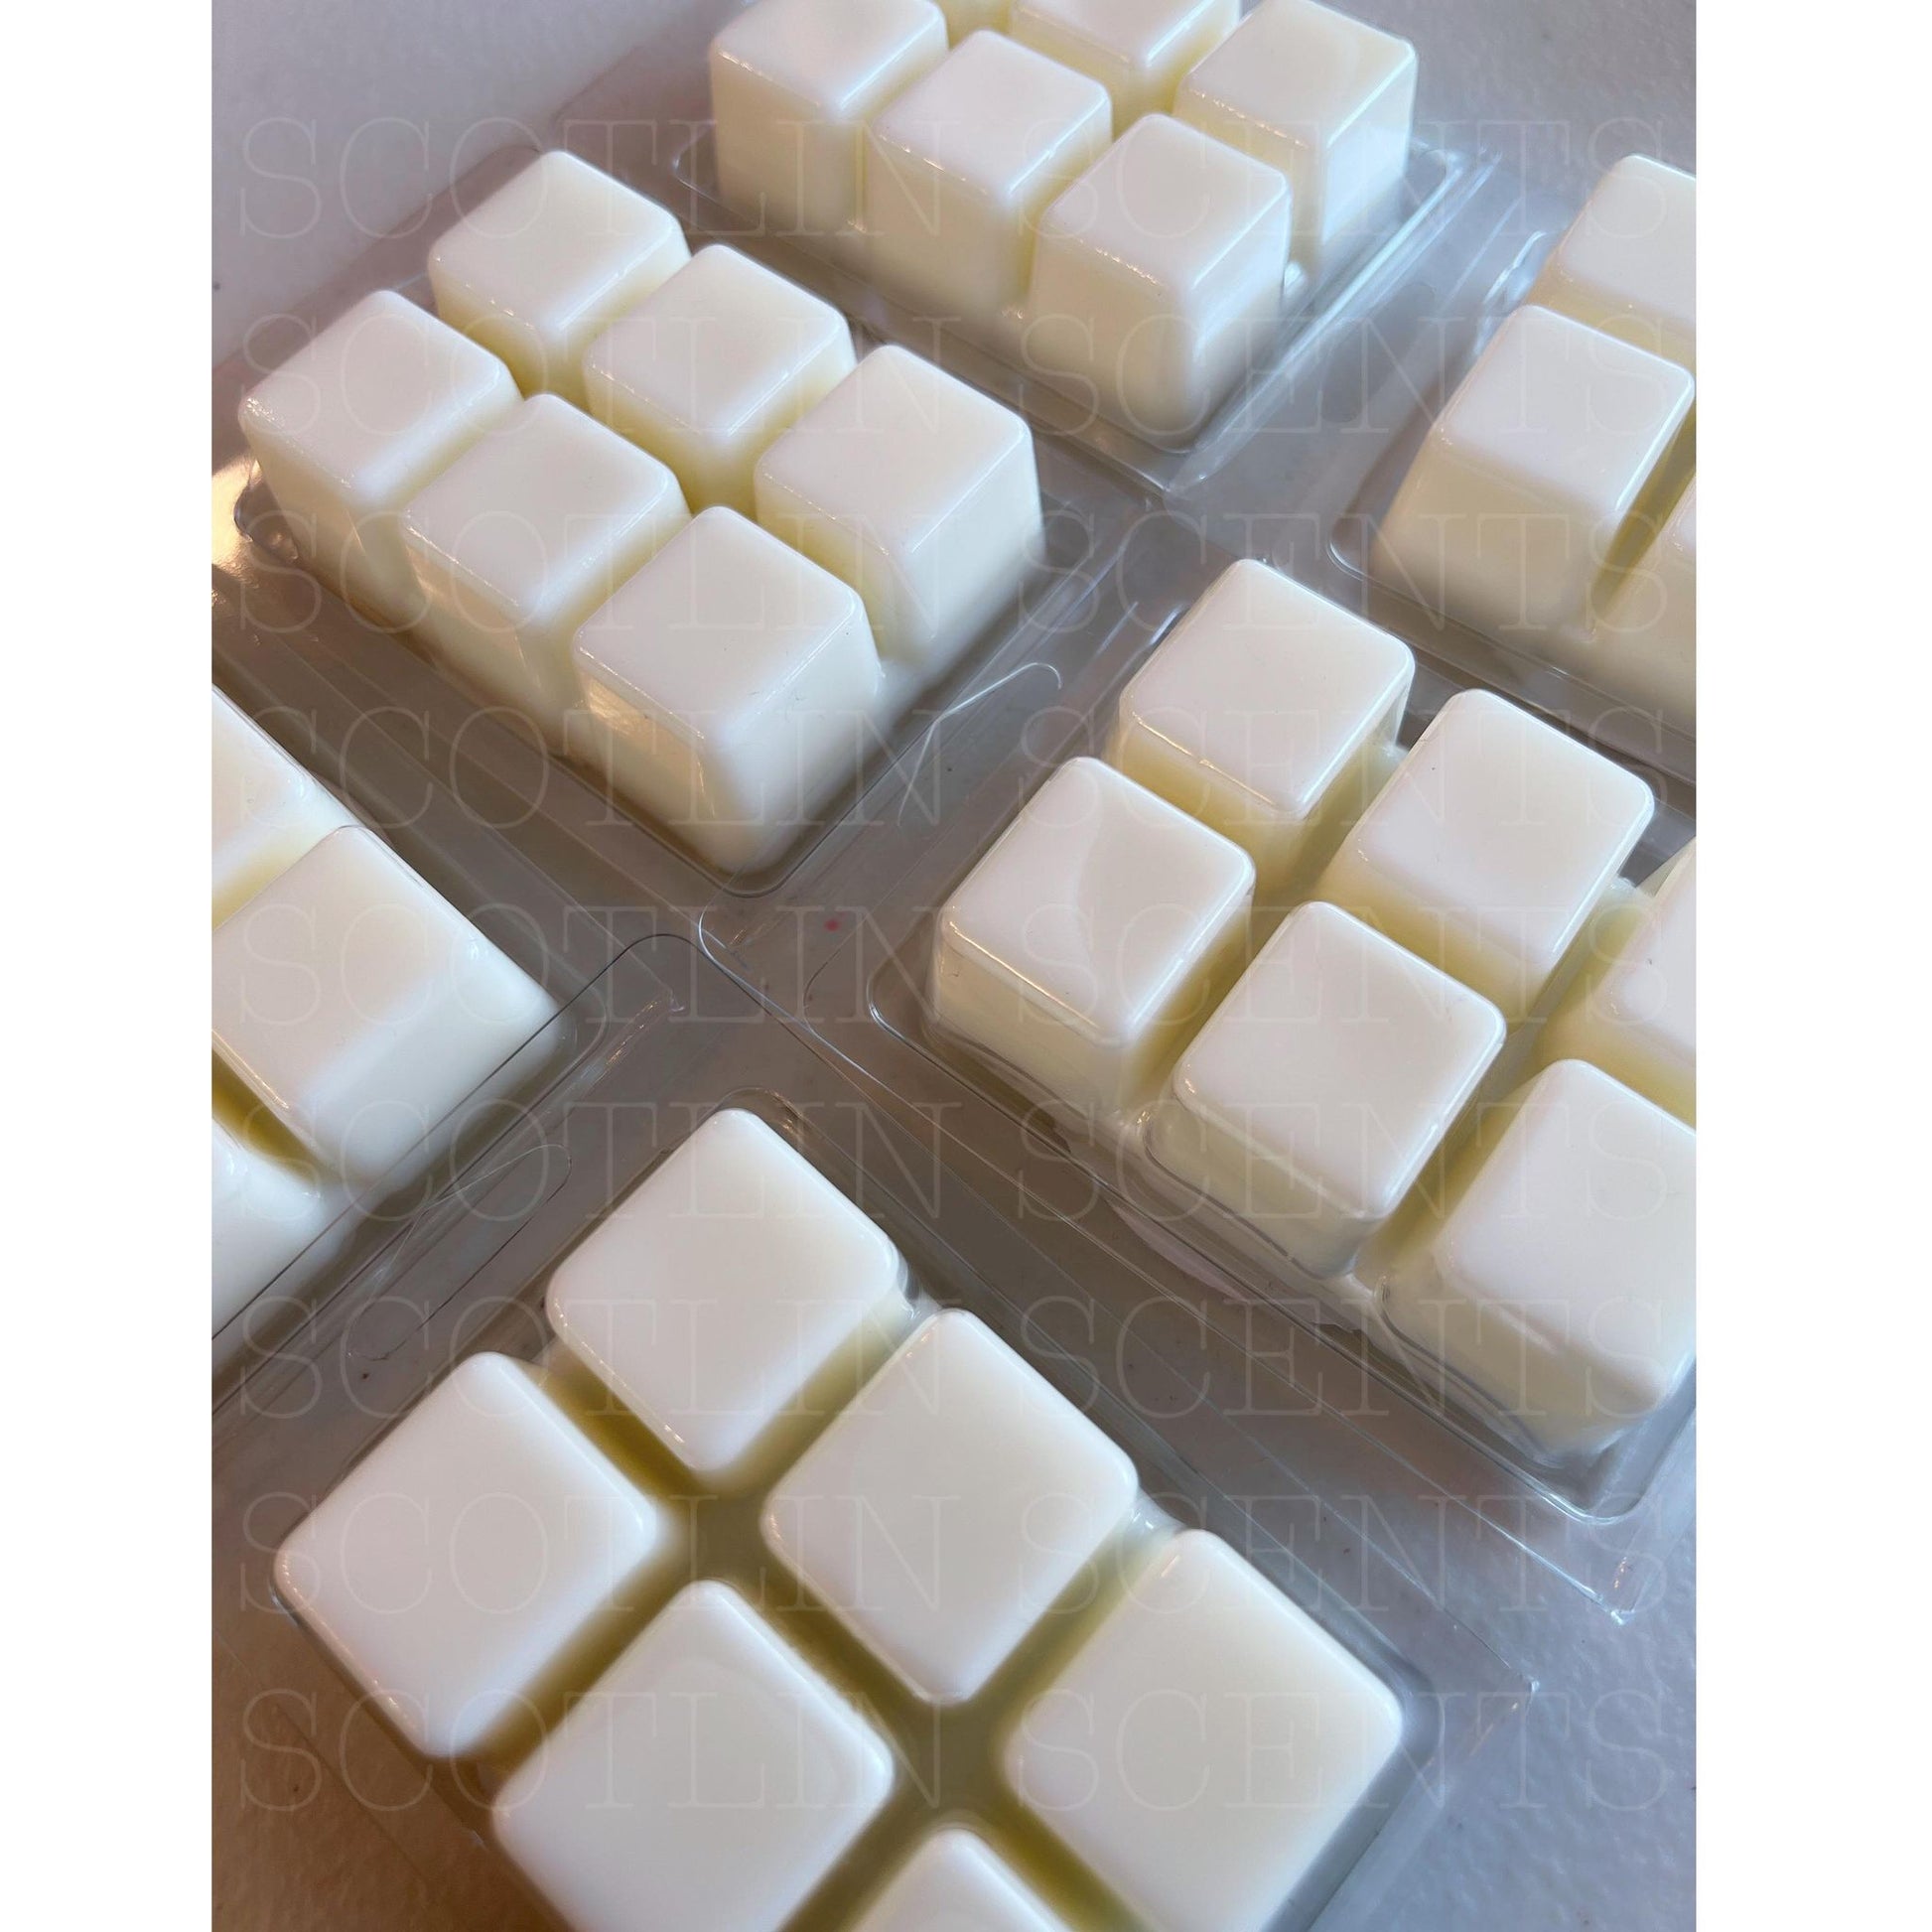 Highly Scented Wax Melts - Honeysuckle